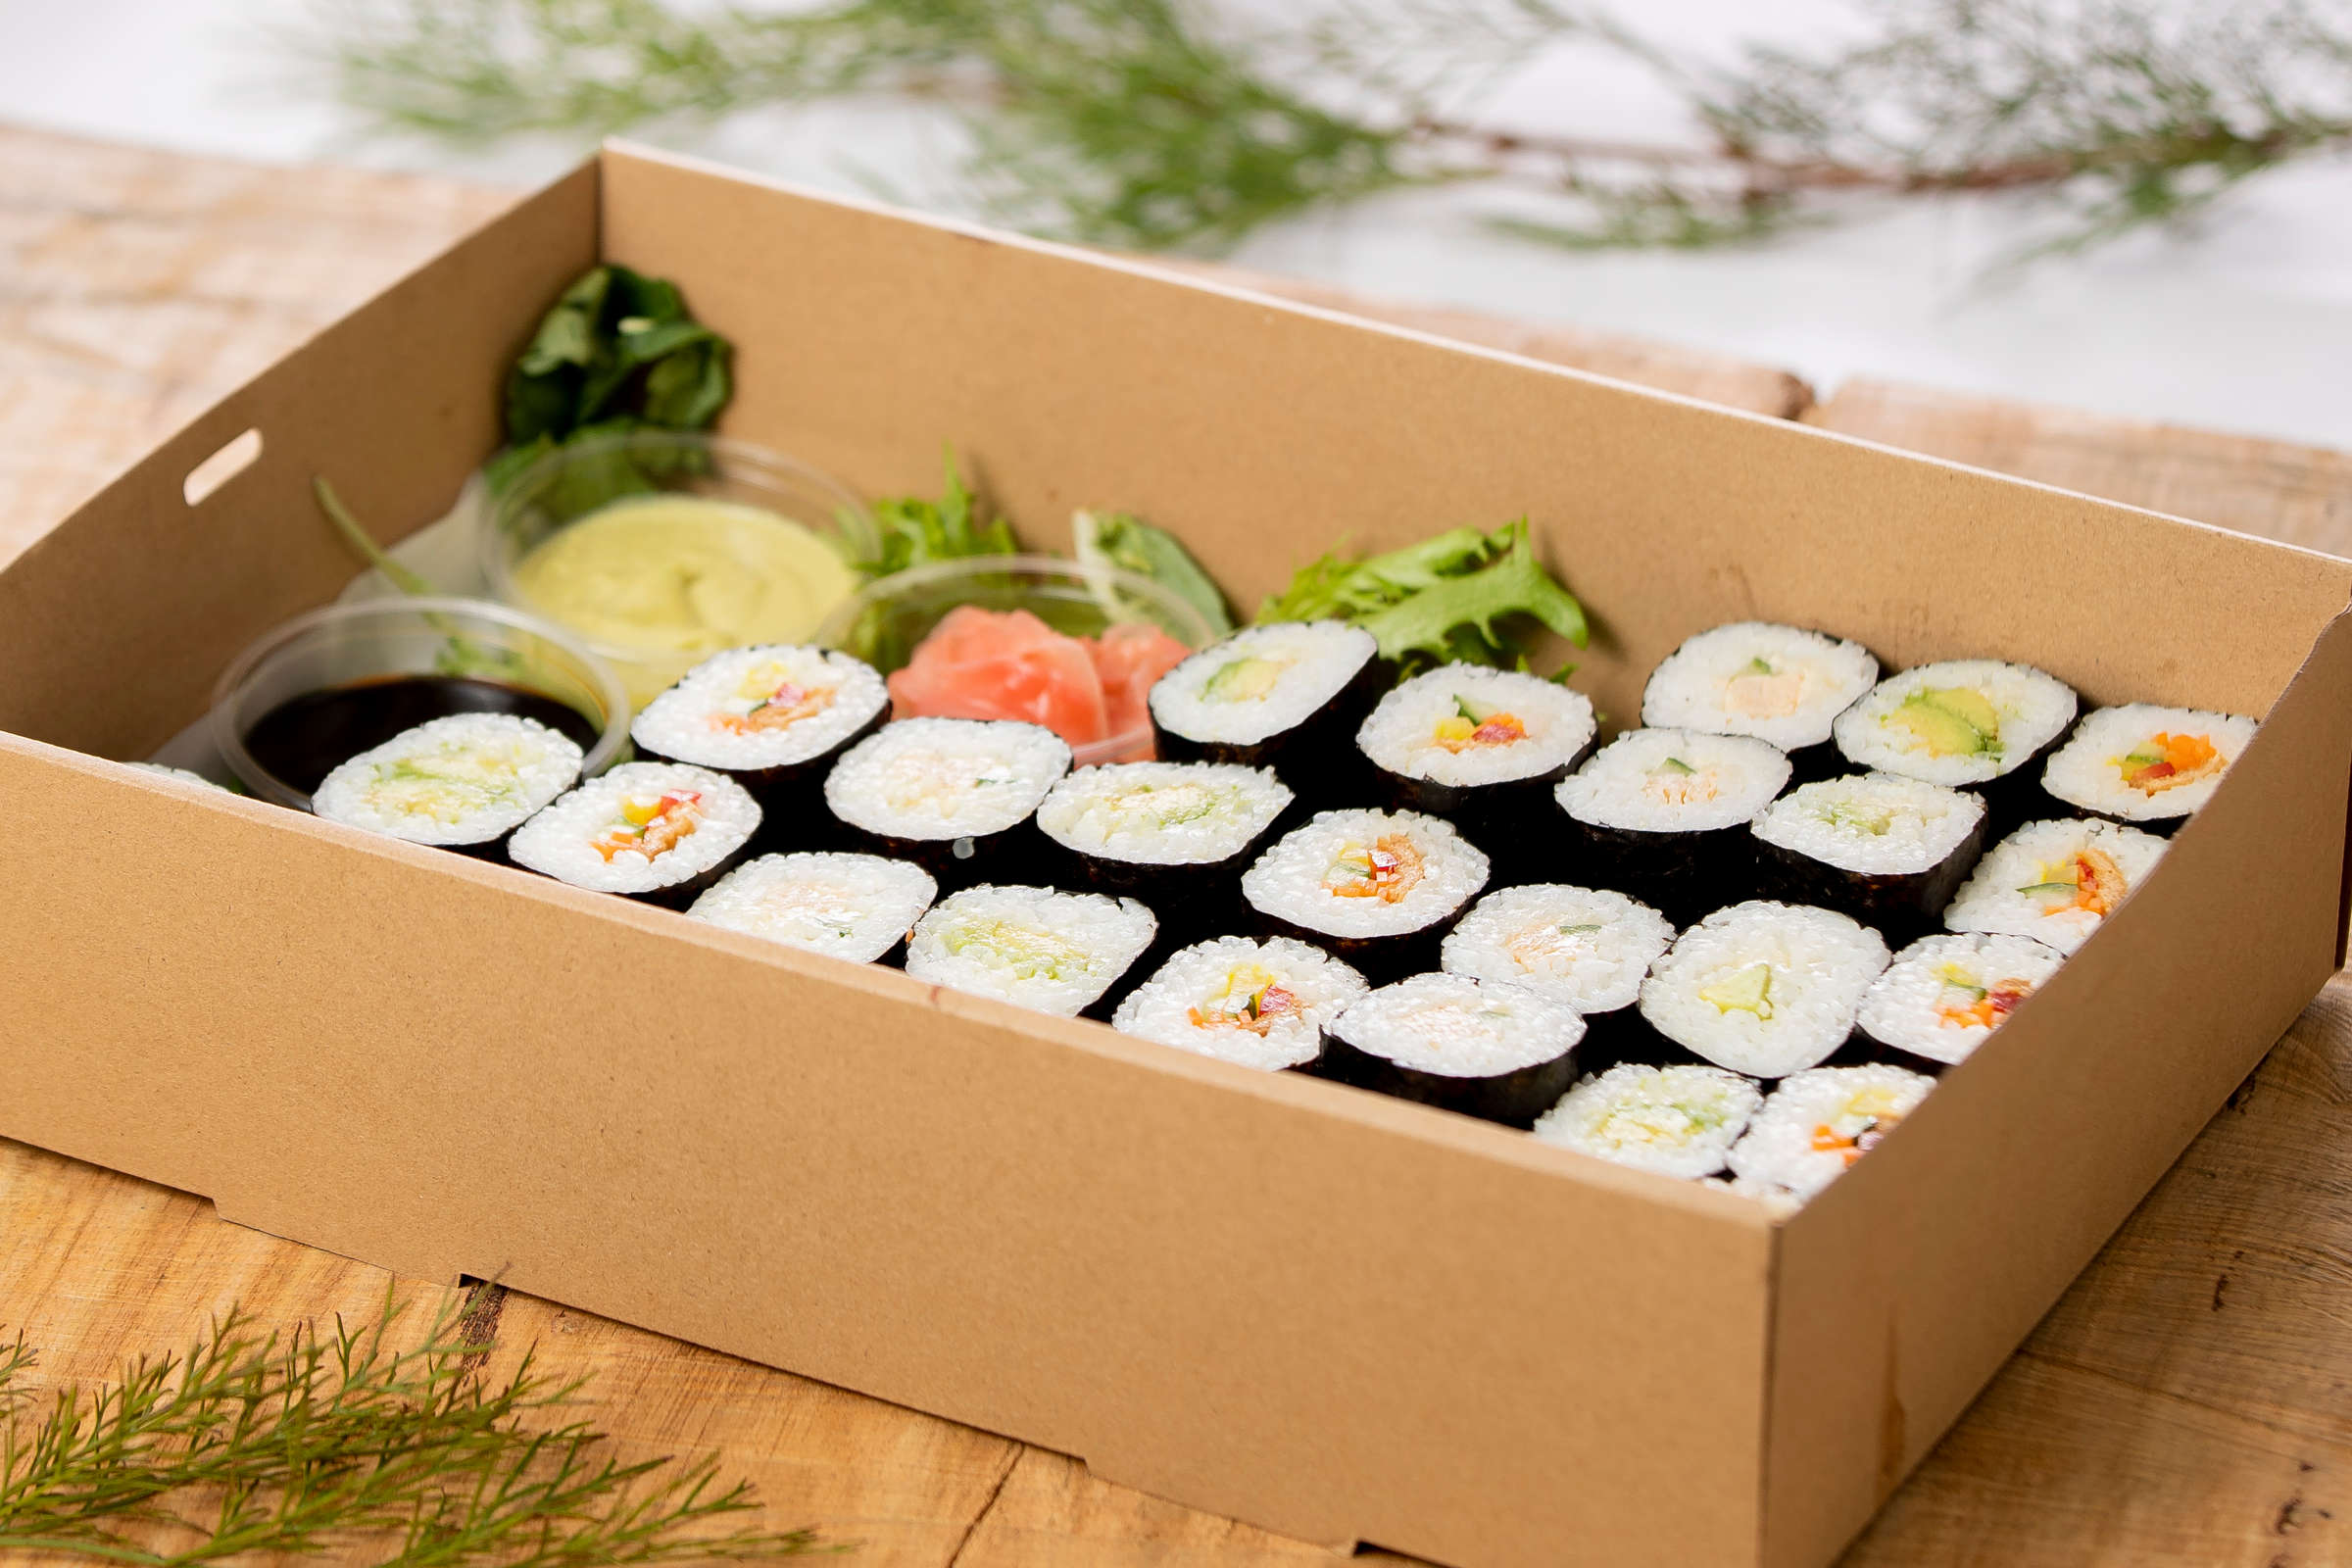 Sushi box containing 32 pieces of vegan and vegetarian sushi with soy sauce. Credit: Richard Jupe.